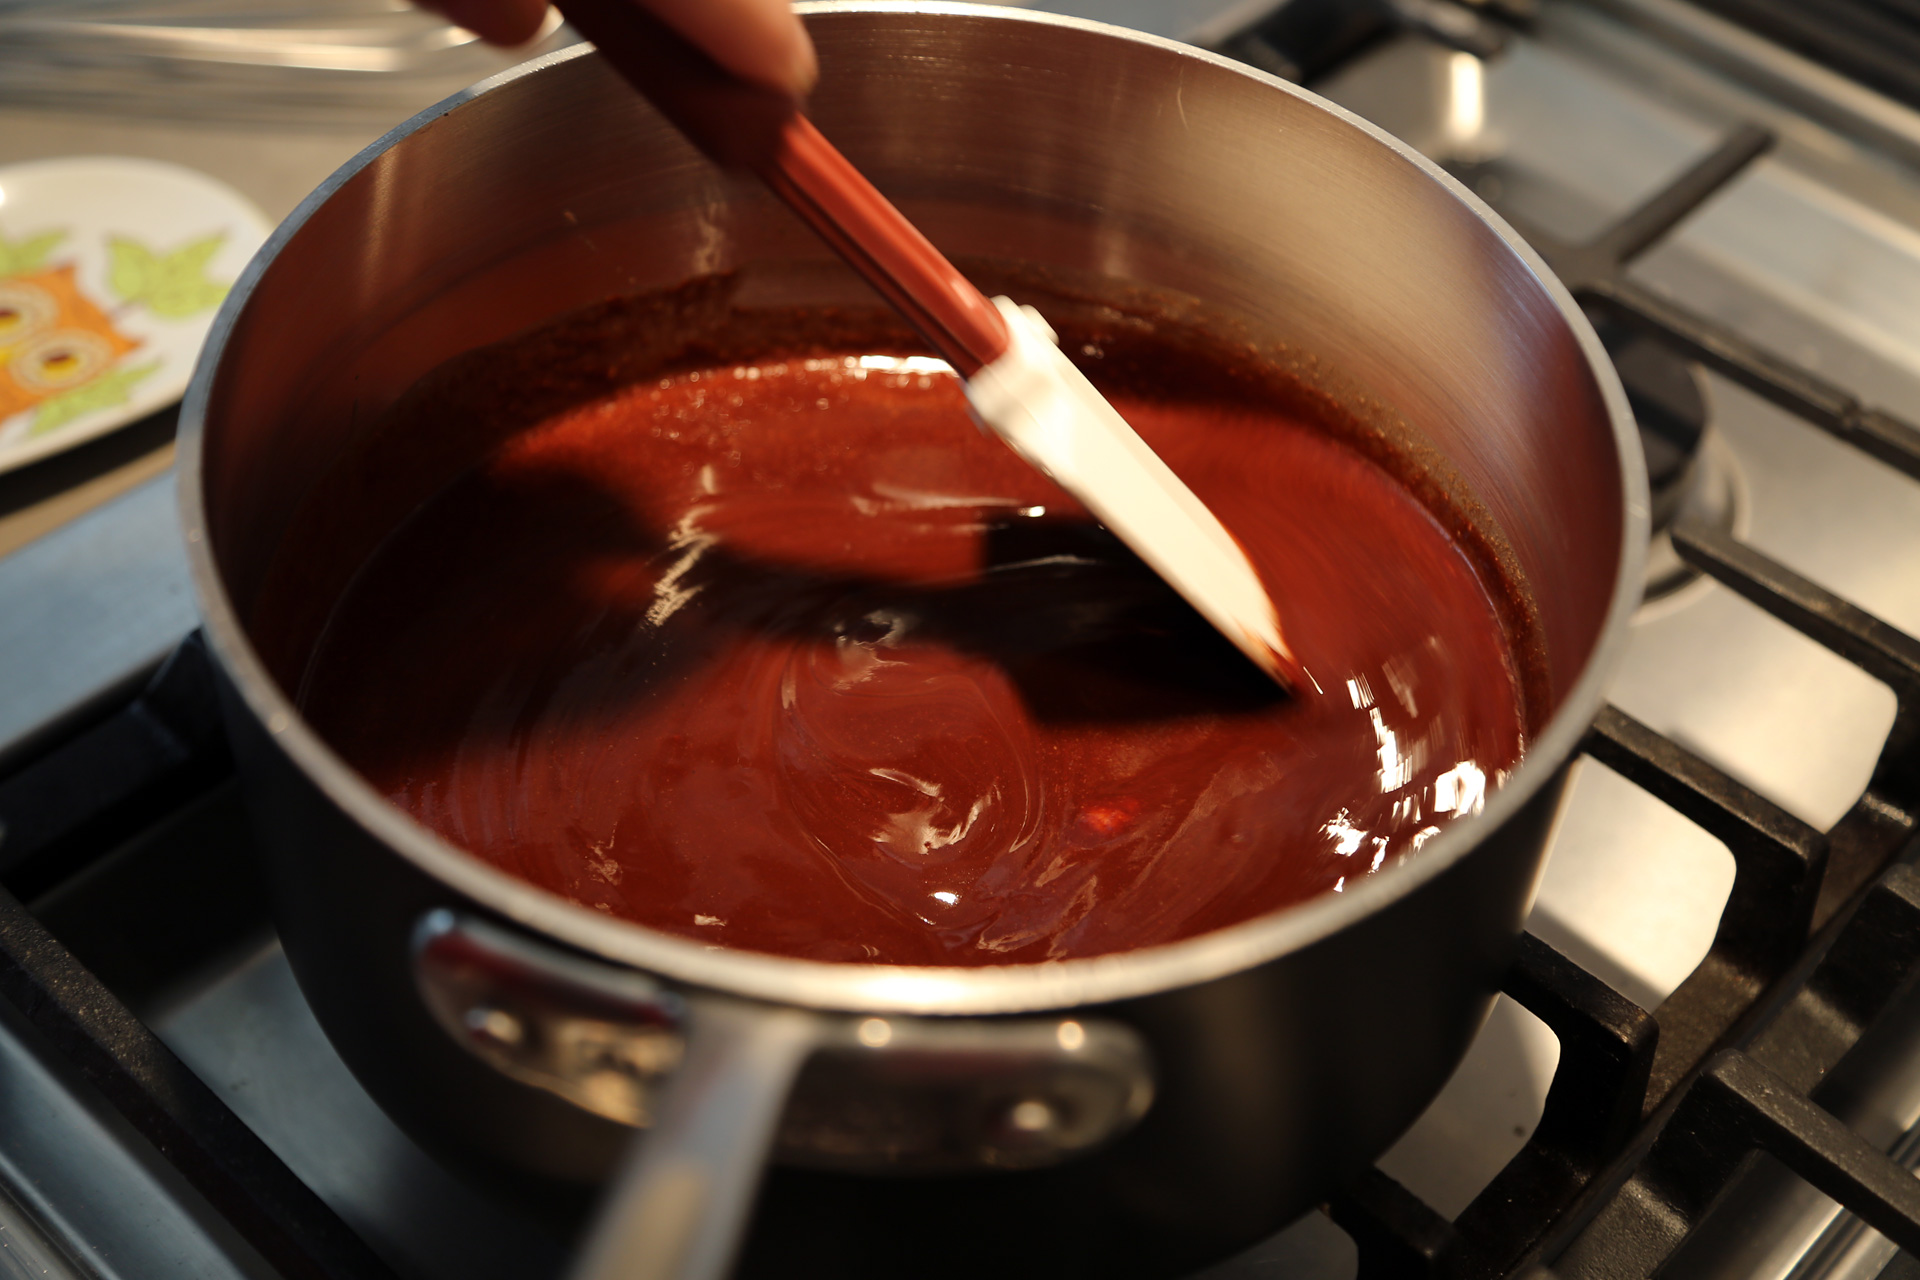 In a medium saucepan over low heat, melt the butter and bittersweet chocolate, stirring, until smooth.